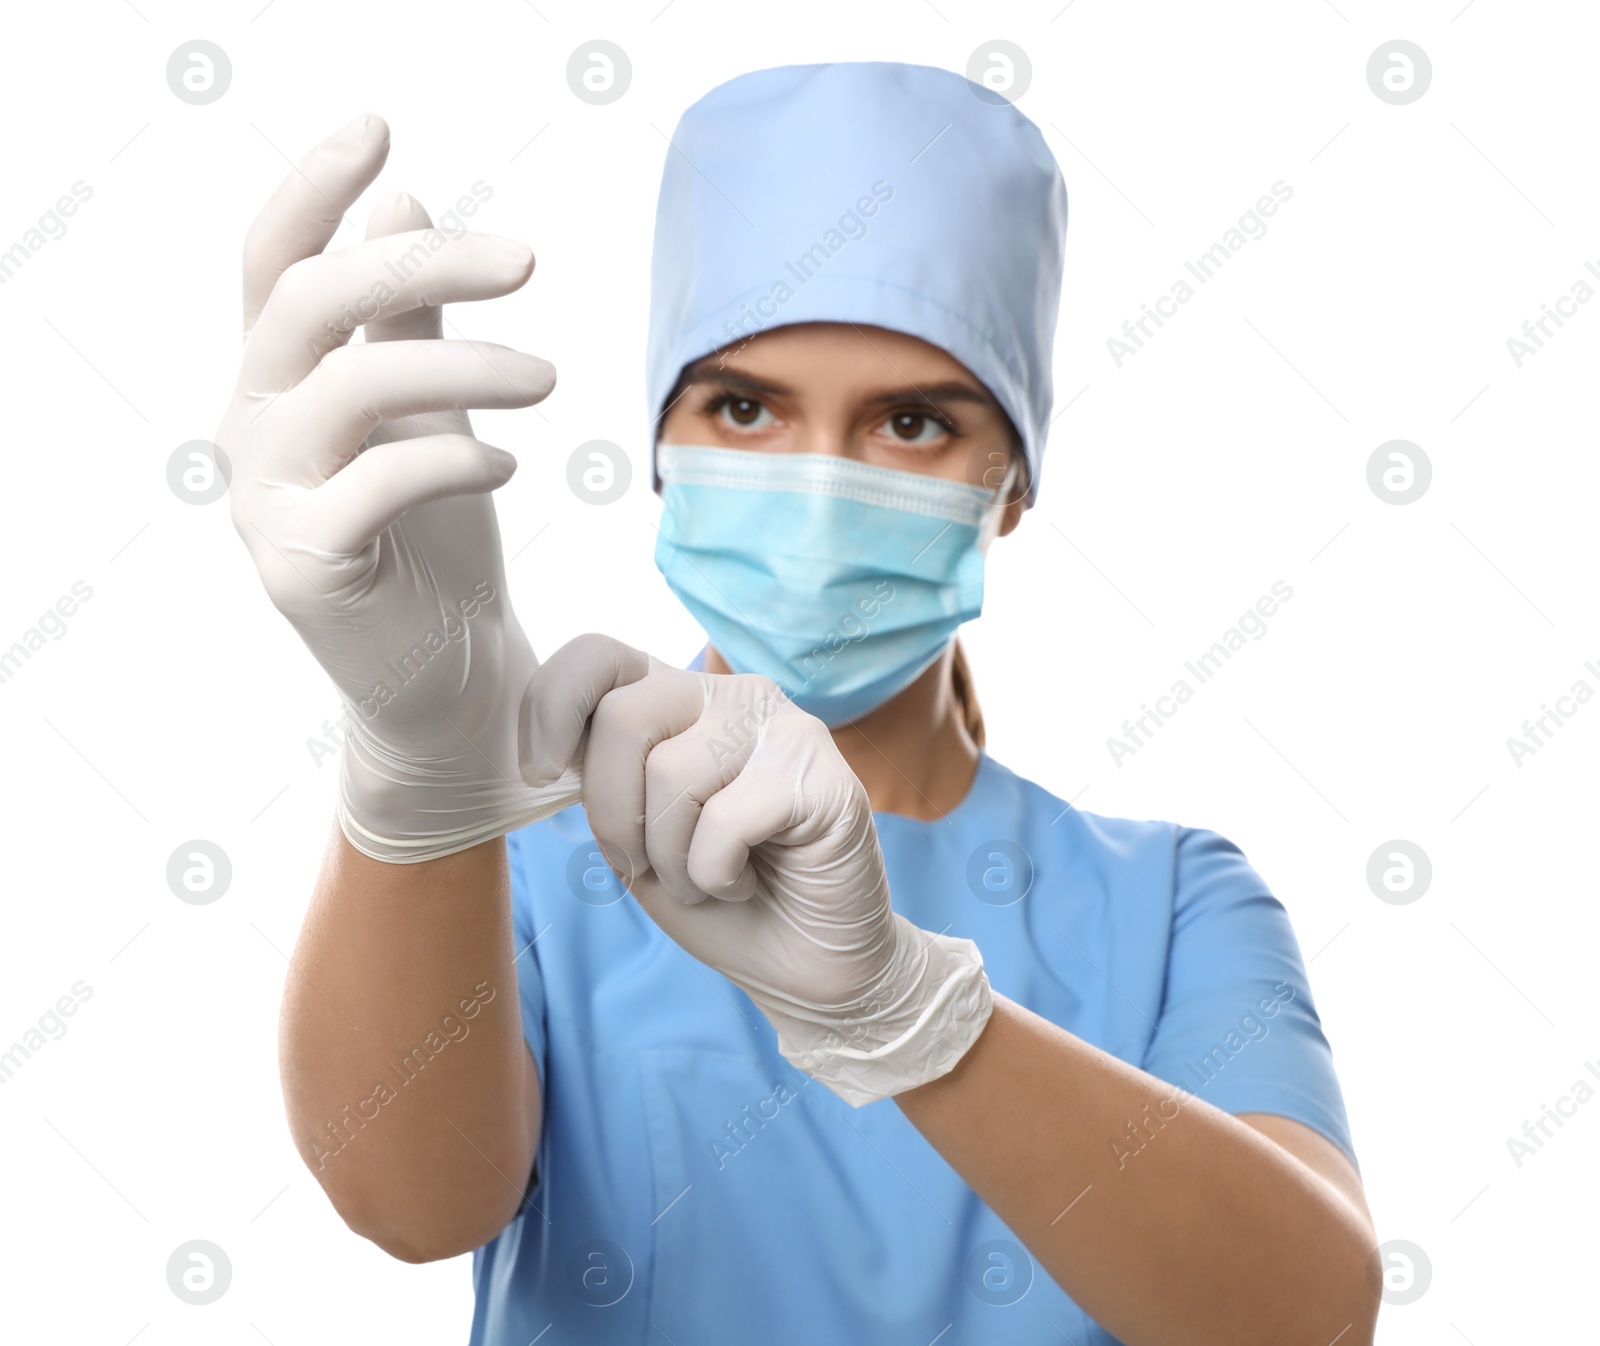 Photo of Doctor in protective mask and scrubs putting on medical gloves against white background